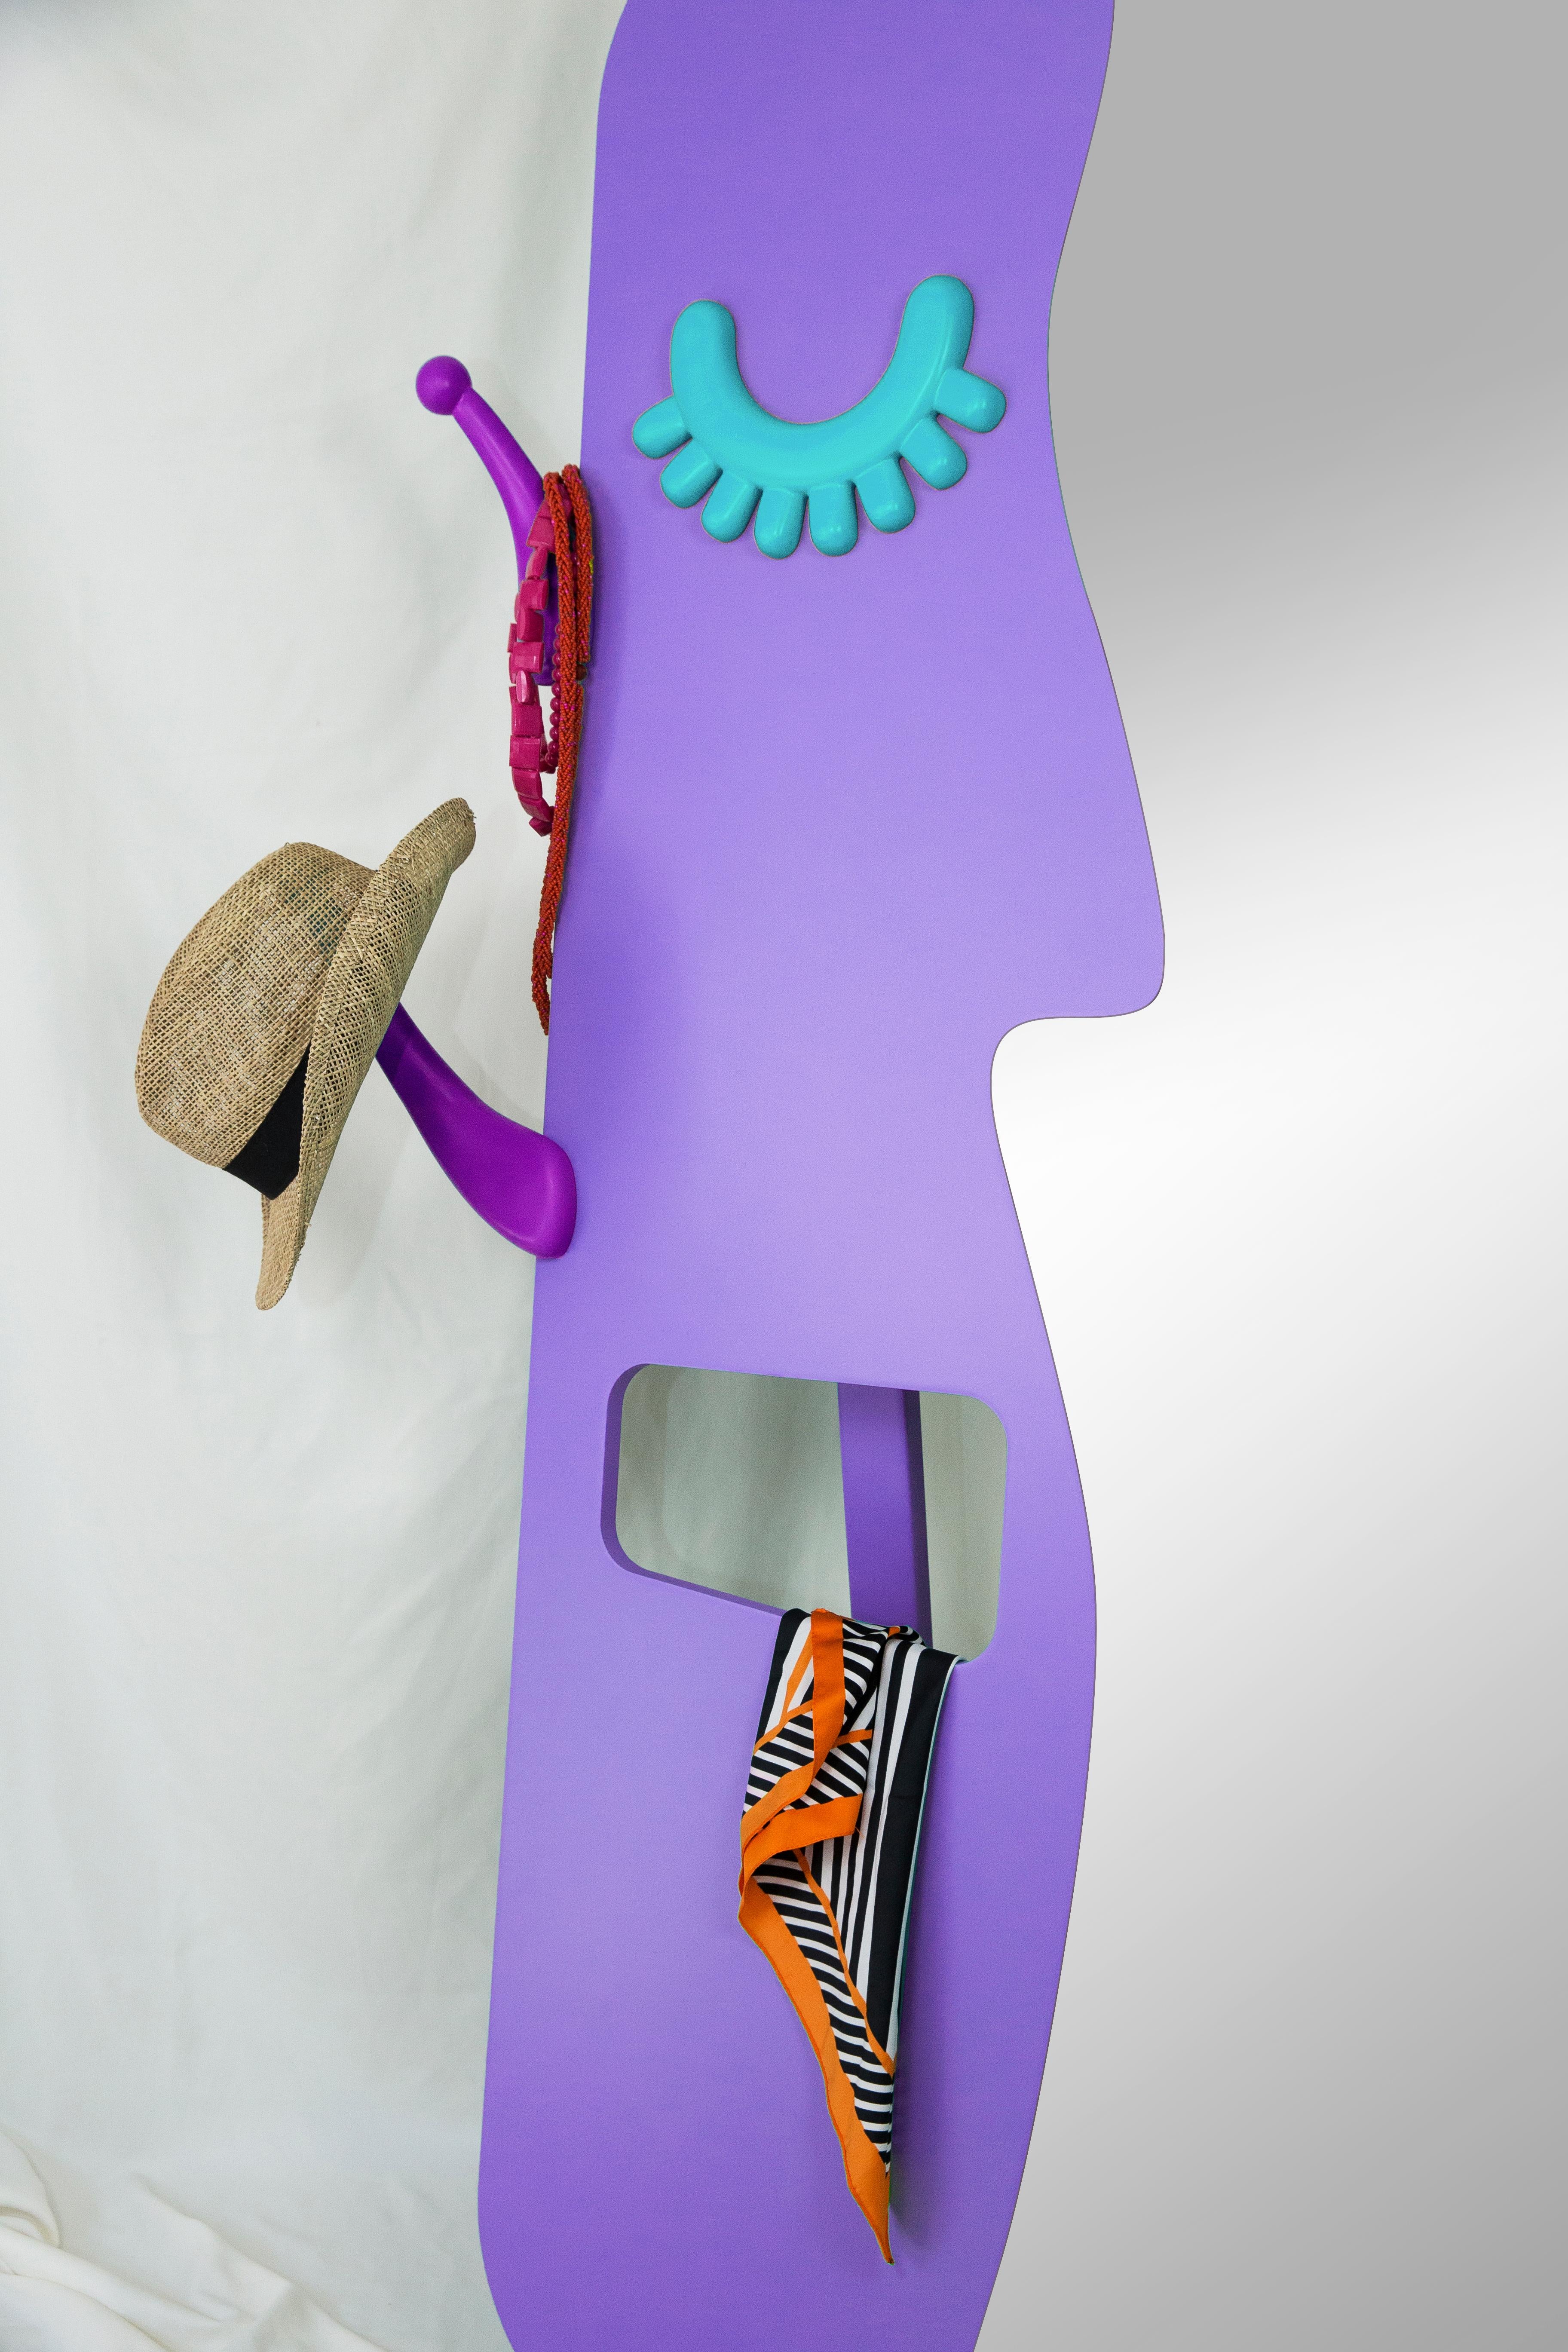 Face to Face dressing mirror and hanger

The hanger that helps you get dressed was combined with the mirror that shows your best self; a fun design that will make you smile.

Production method and material

The body is painted with lacquer paint by